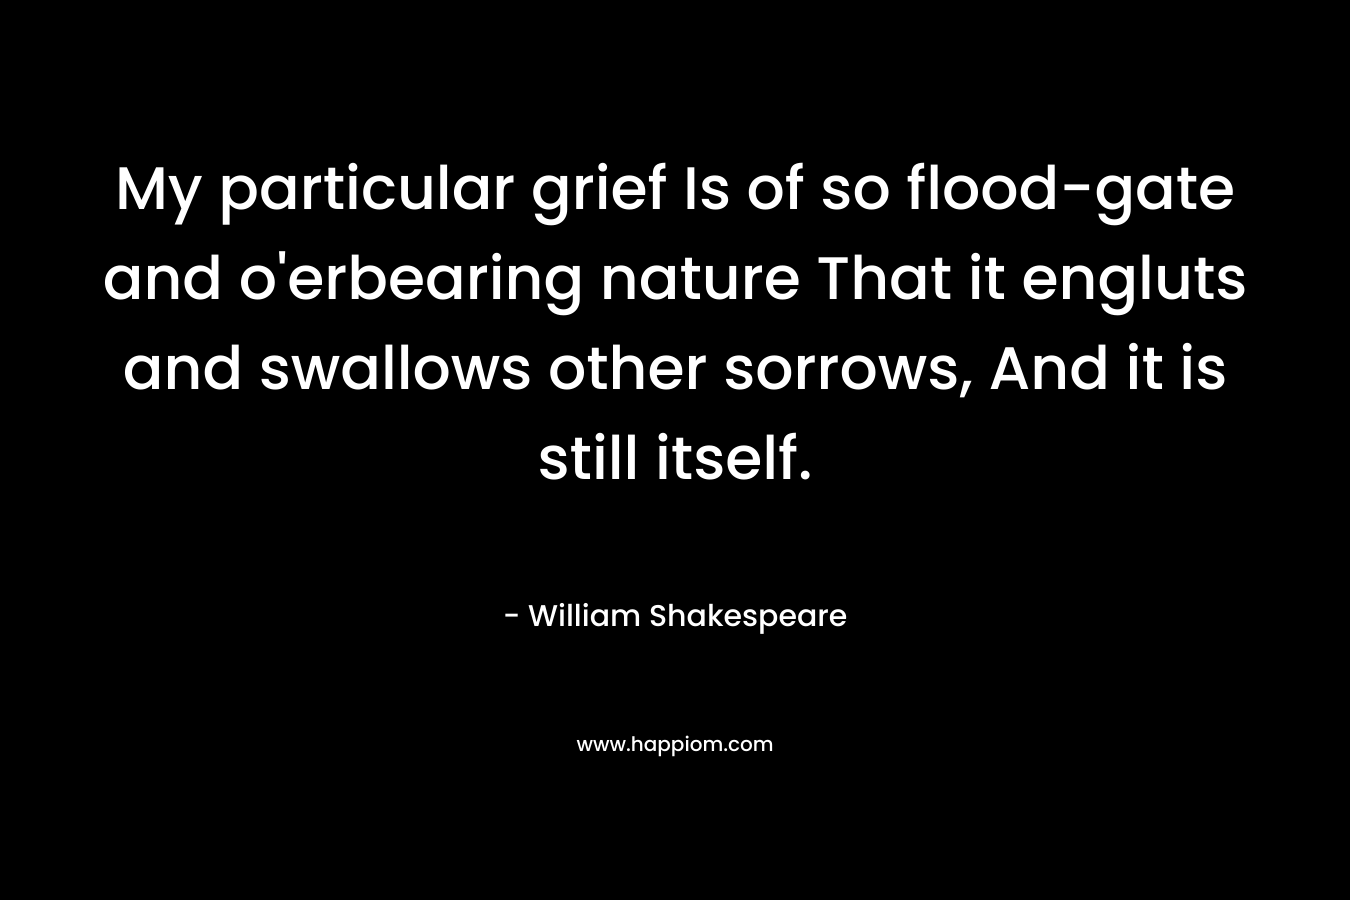 My particular grief Is of so flood-gate and o’erbearing nature That it engluts and swallows other sorrows, And it is still itself. – William Shakespeare